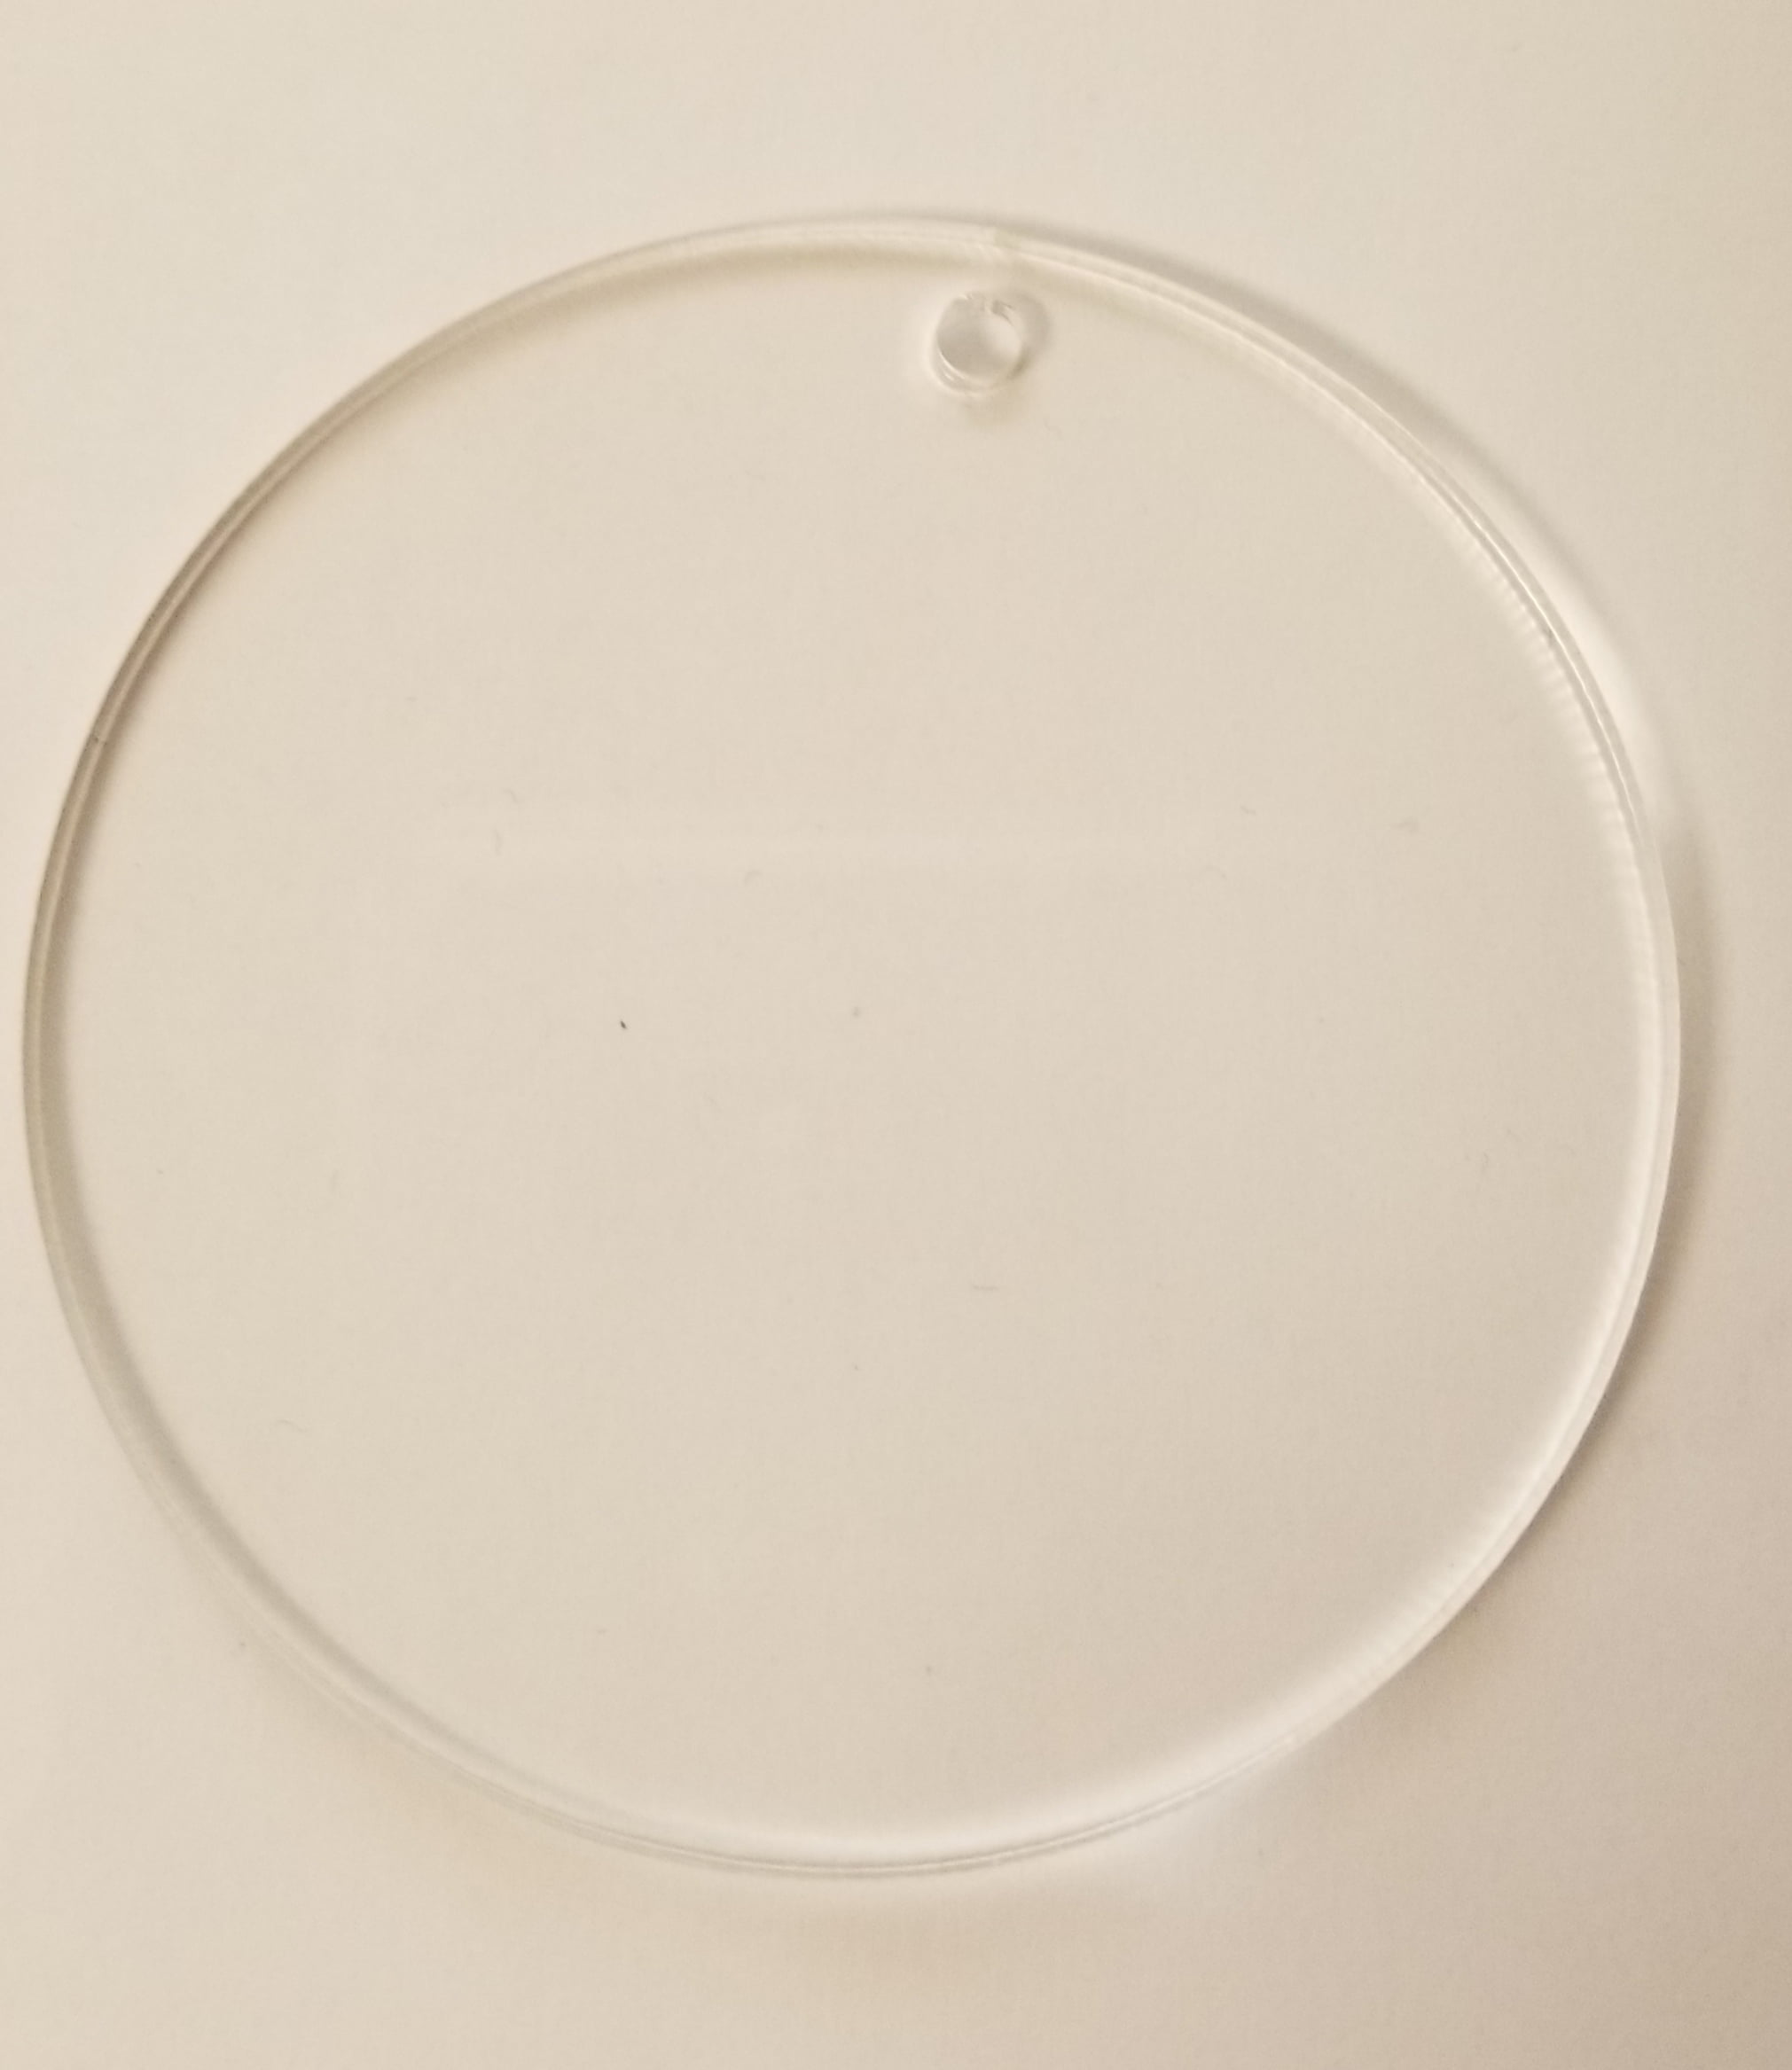 8 Pieces Clear Acrylic Sheets Round Acrylic Discs 1/12 Inch Thick